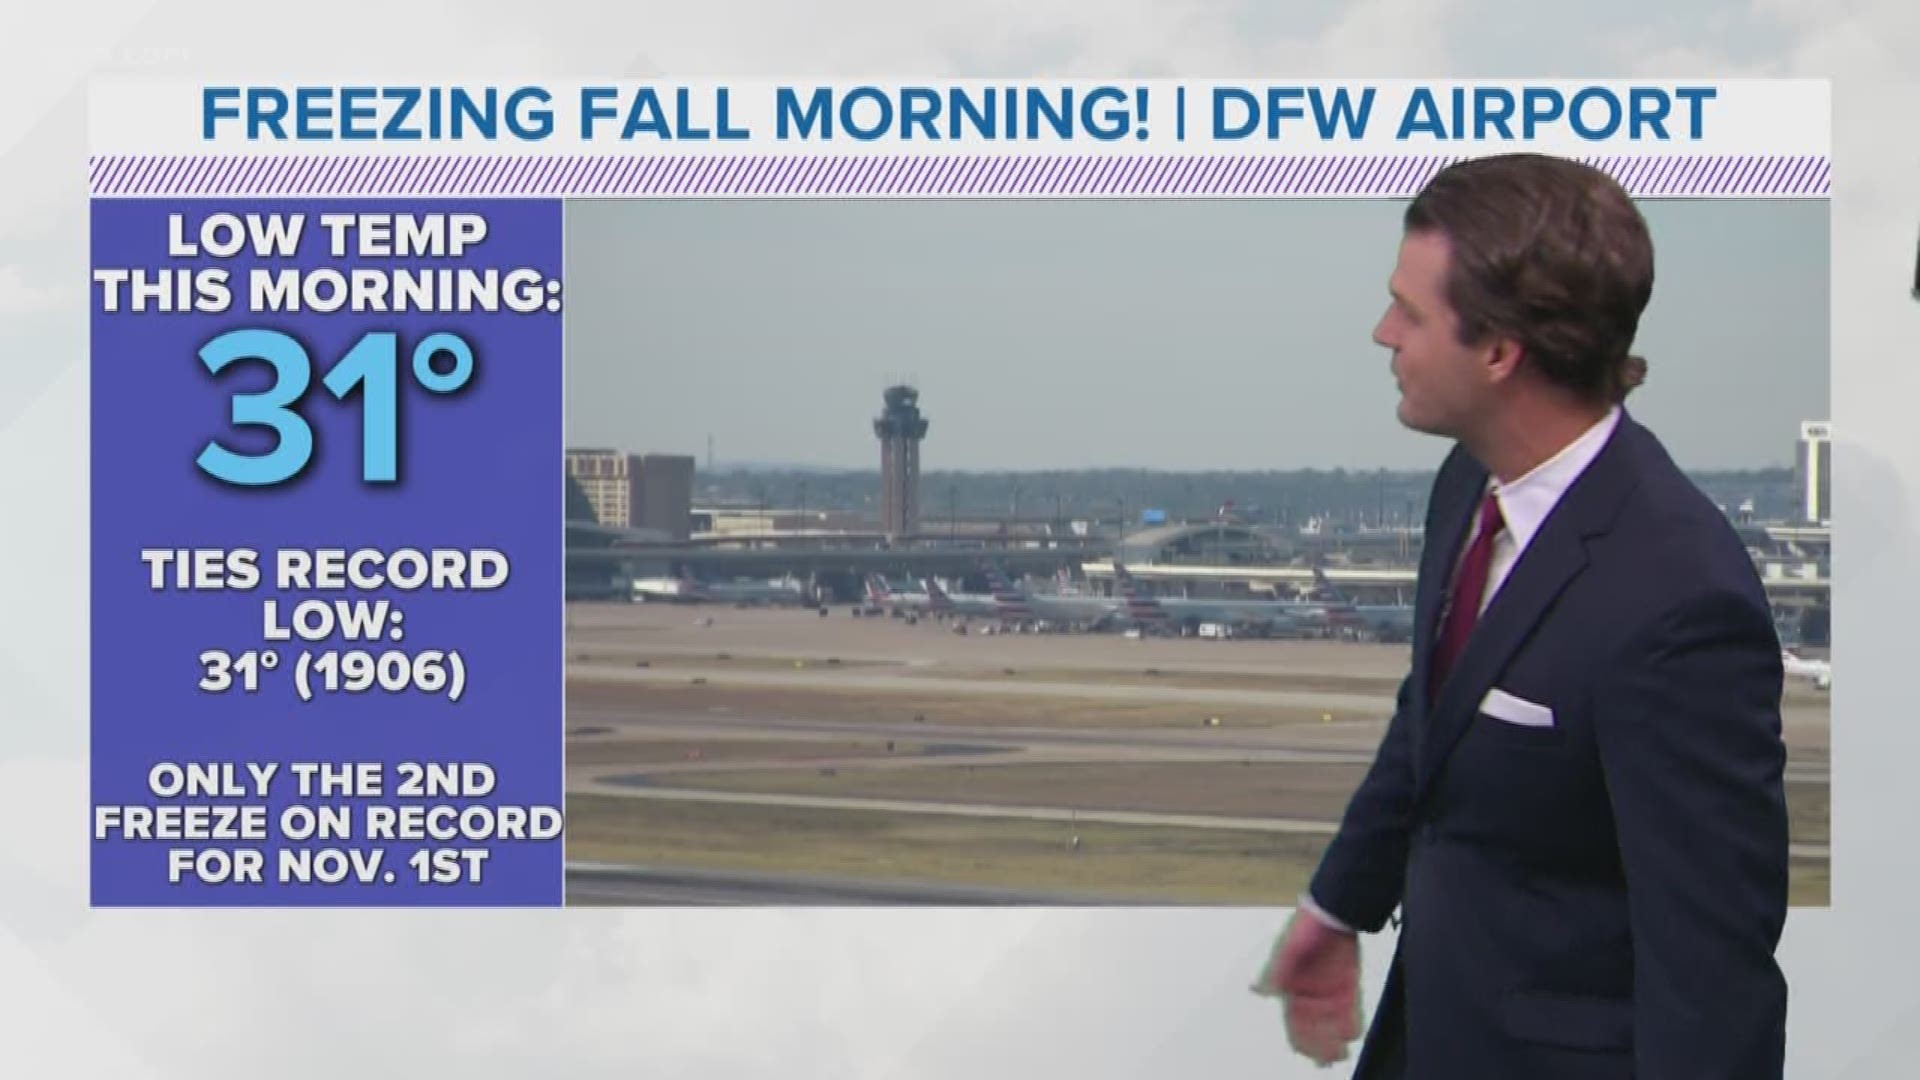 DFW Airport recorded its lowest temp ever for Nov. 1, tied with the same day in 1906.